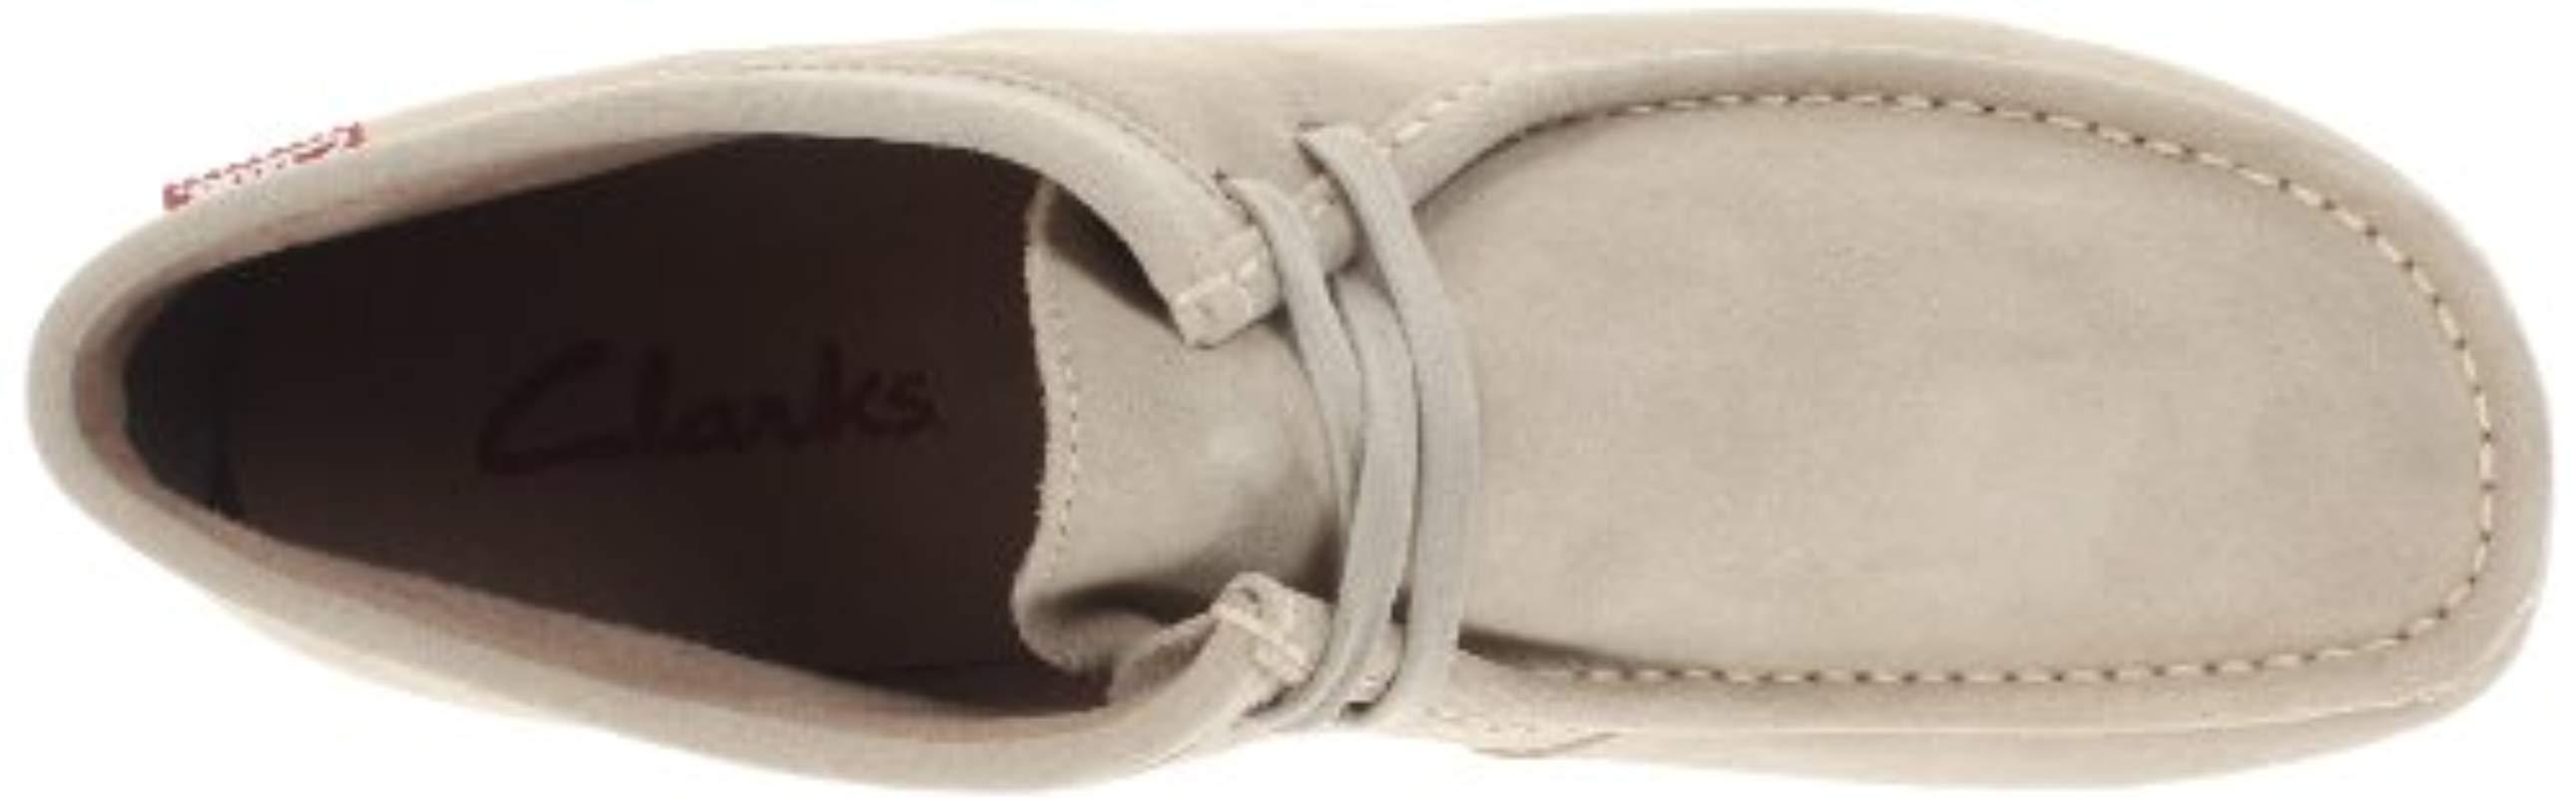 Clarks Stinson Hi Chukka Boot,sand Suede,8 M Us in Natural for Men